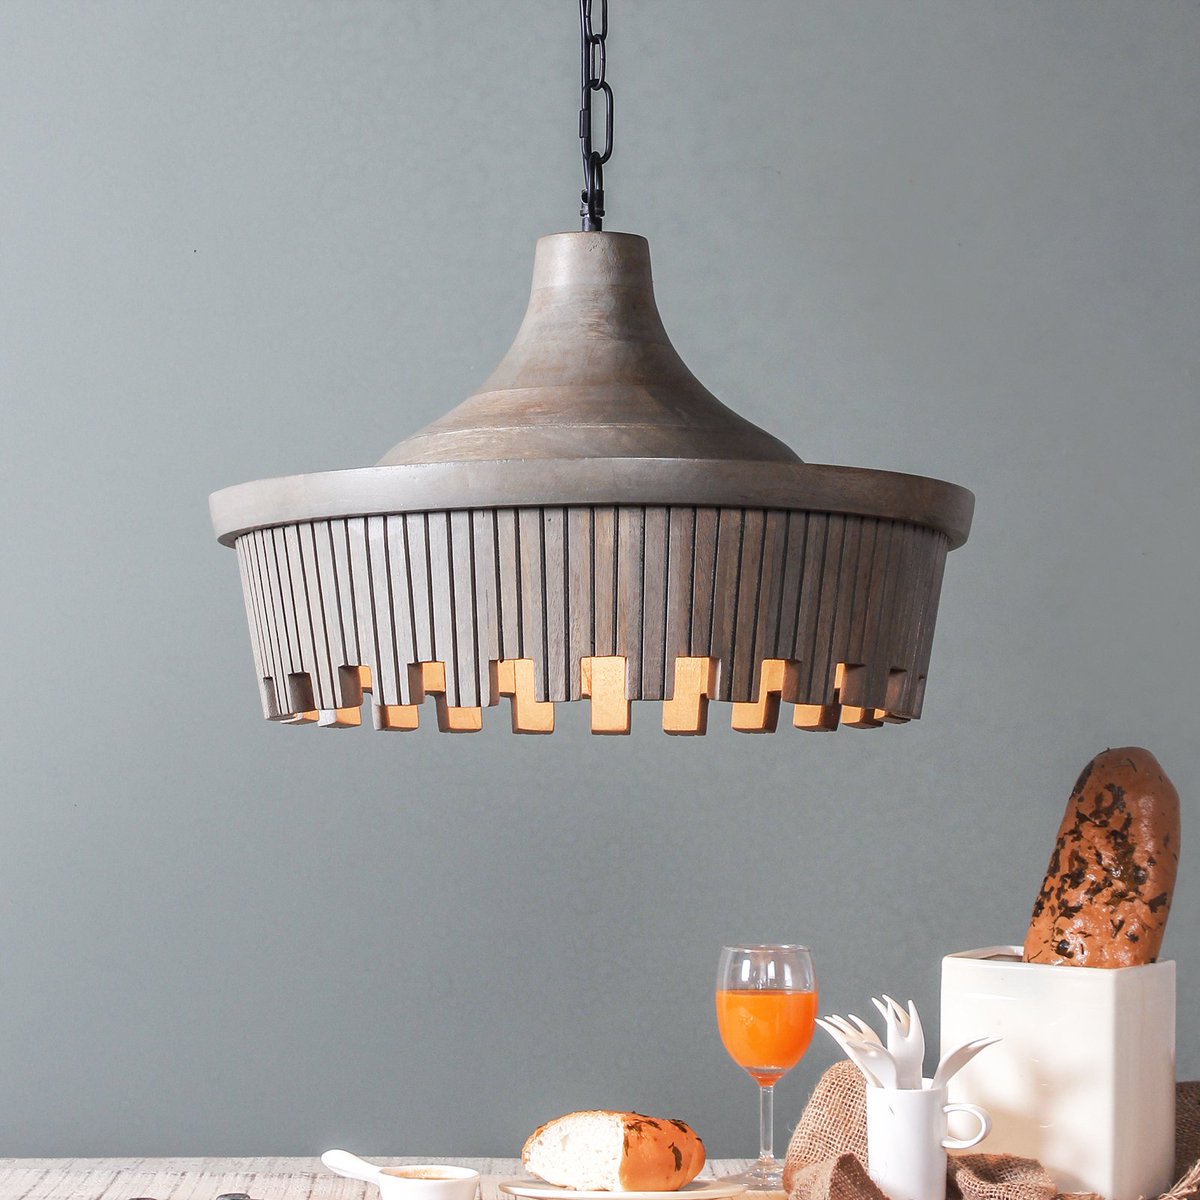 Time for some thursday inspiration! Our Braxton Grey Pendant lamp adds just the right layer of warmth to your lovely abode.
Shop now: bit.ly/2LYUfjB
 #pendantlights #lightning #pendantlamp #pendantlighting #pendantlamps #livingroomdecor #livingroom